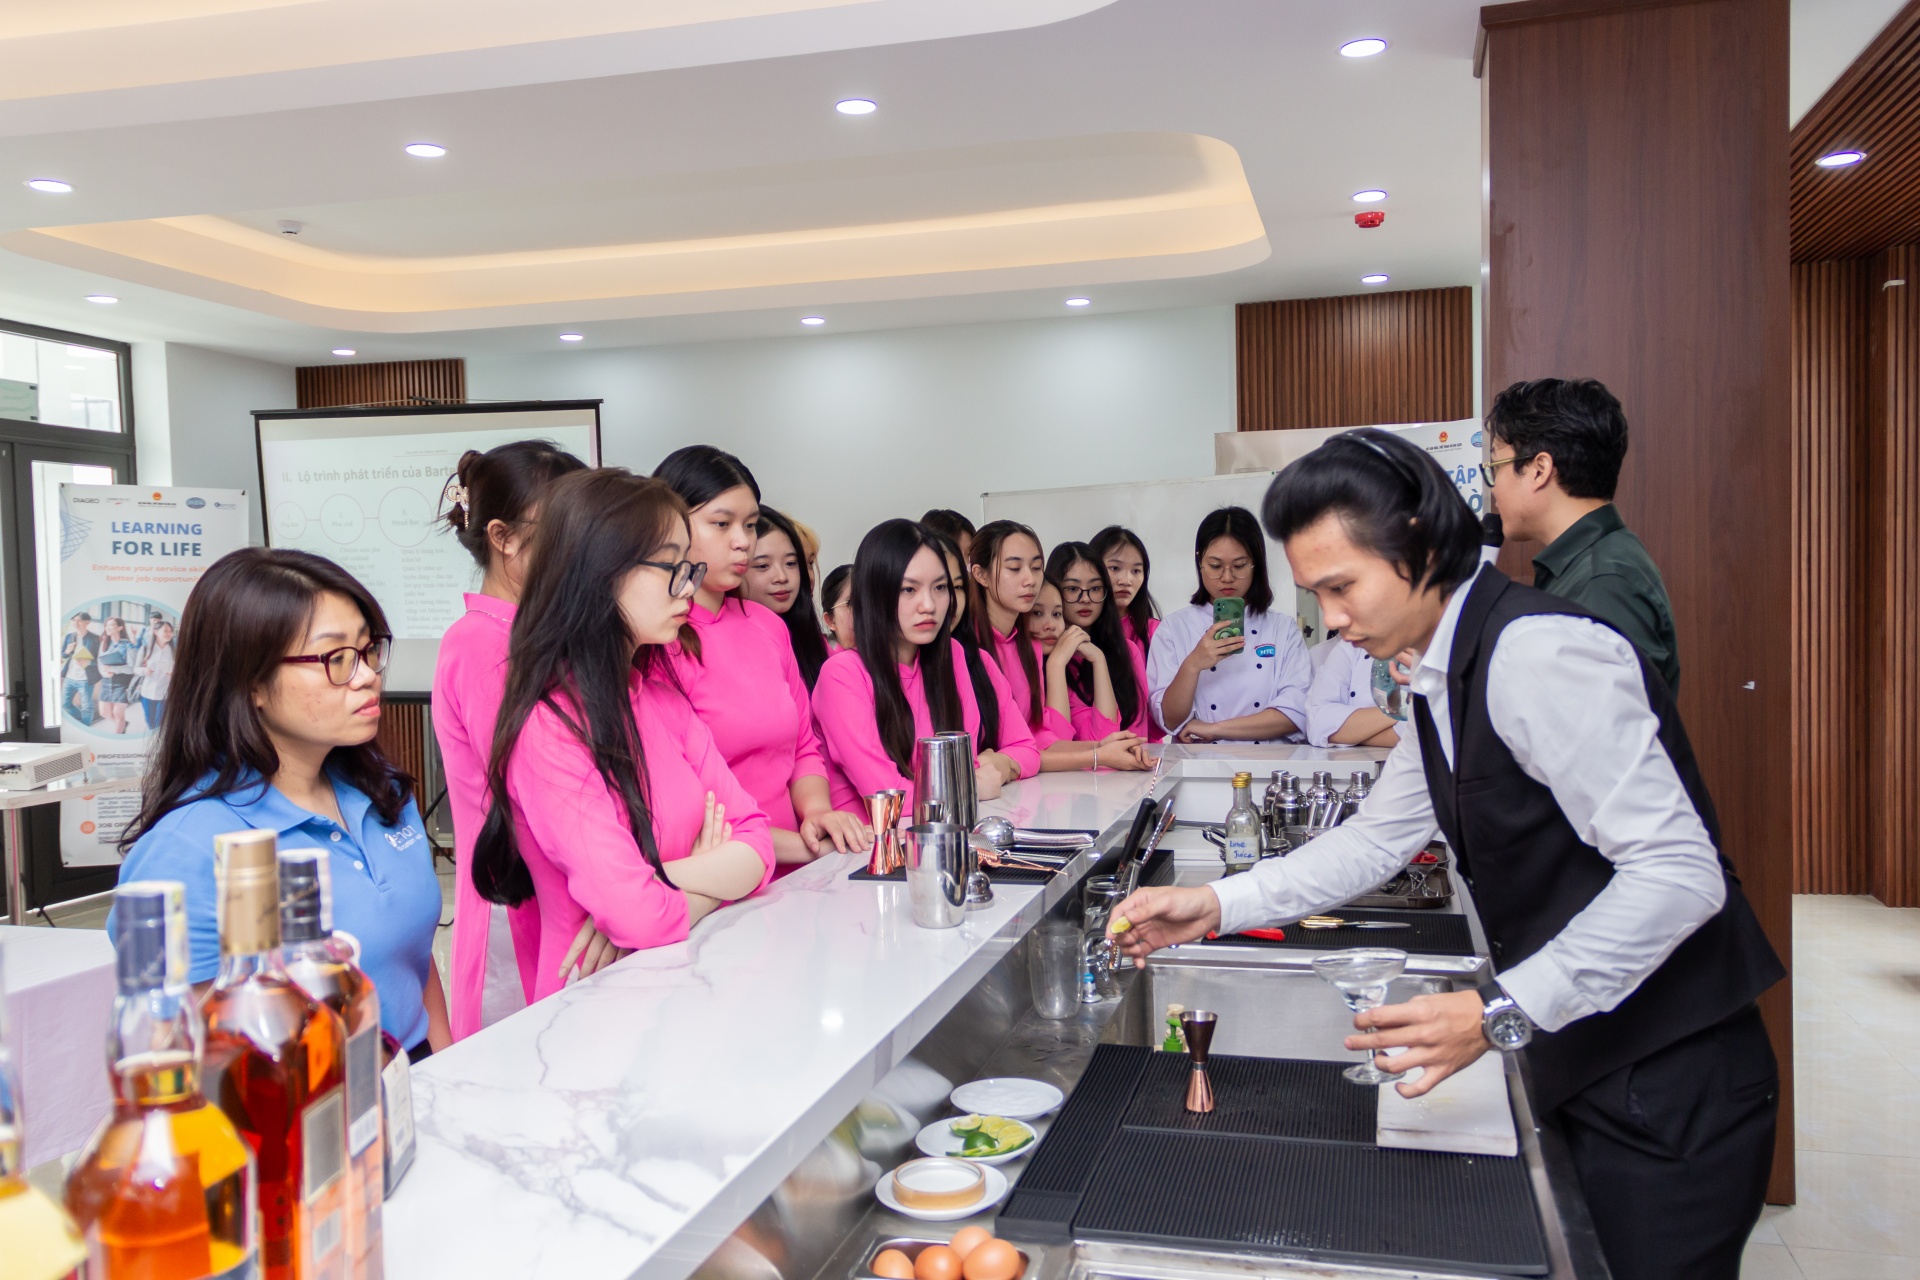 Addressing the soft skills gap in the tourism and hospitality industry